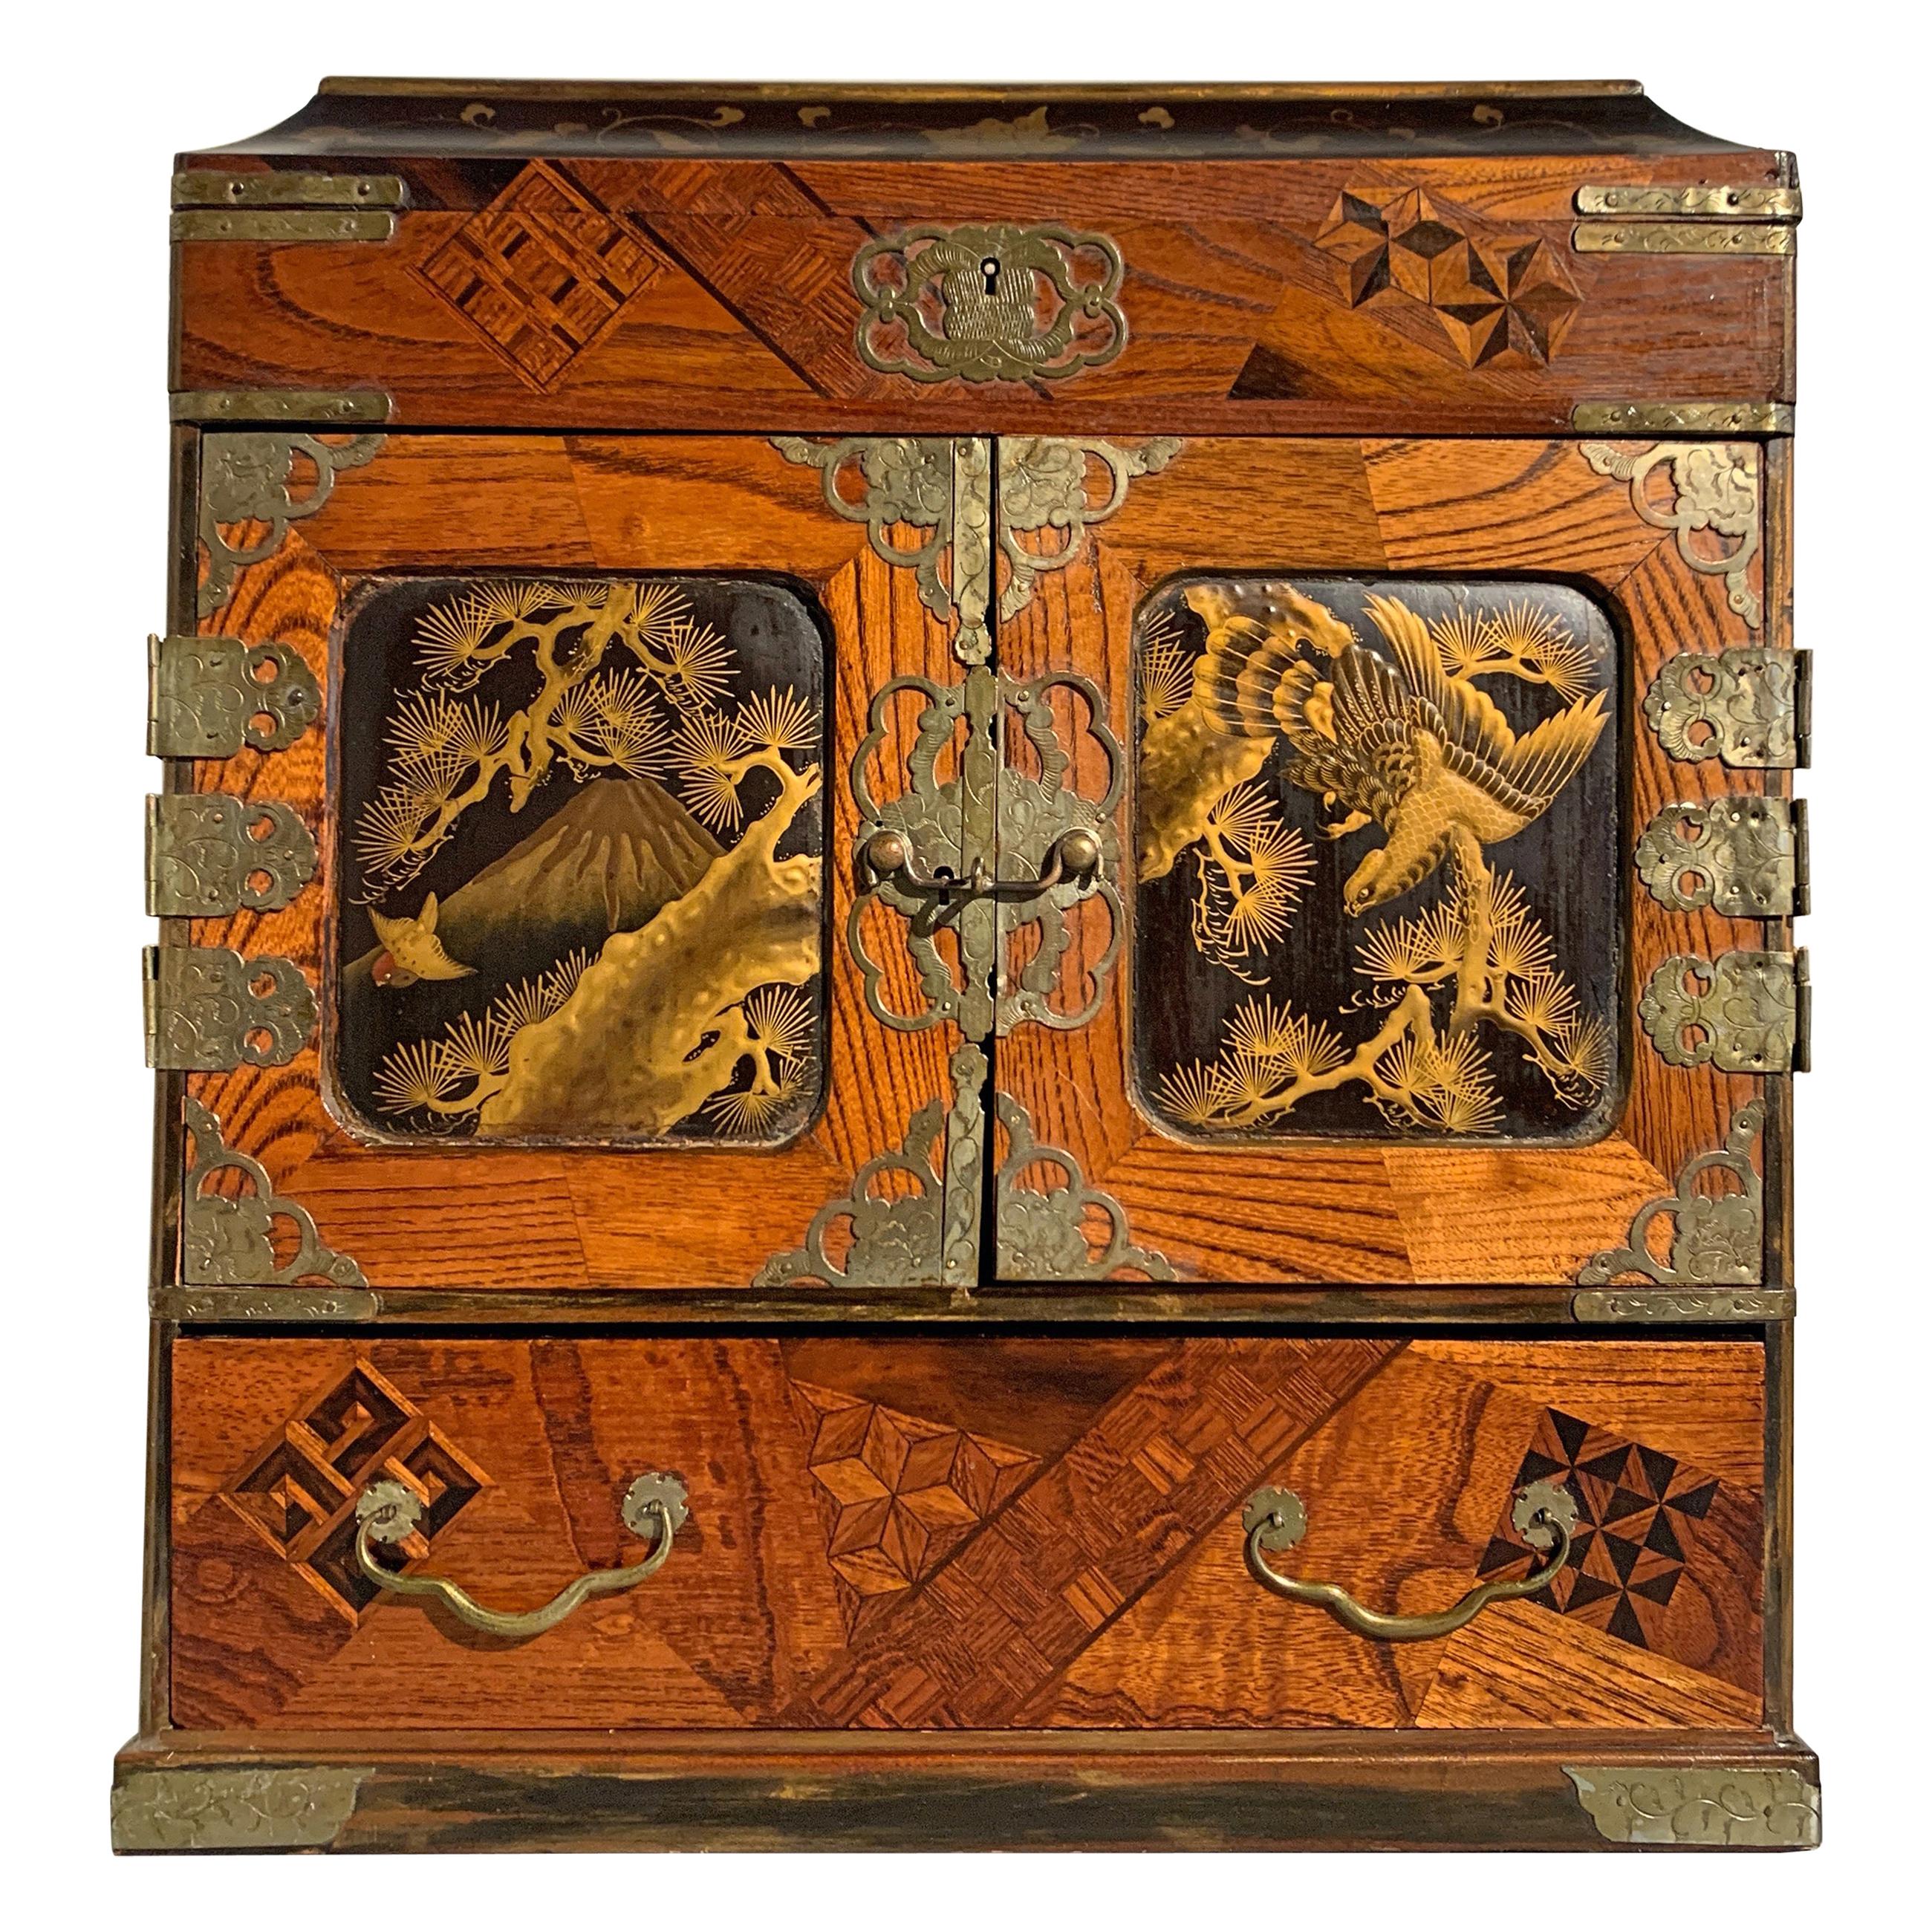 https://a.1stdibscdn.com/japanese-lacquer-and-marquetry-jewelry-or-collector-chest-meiji-period-japan-for-sale/1121189/f_193985421594911378358/19398542_master.jpg